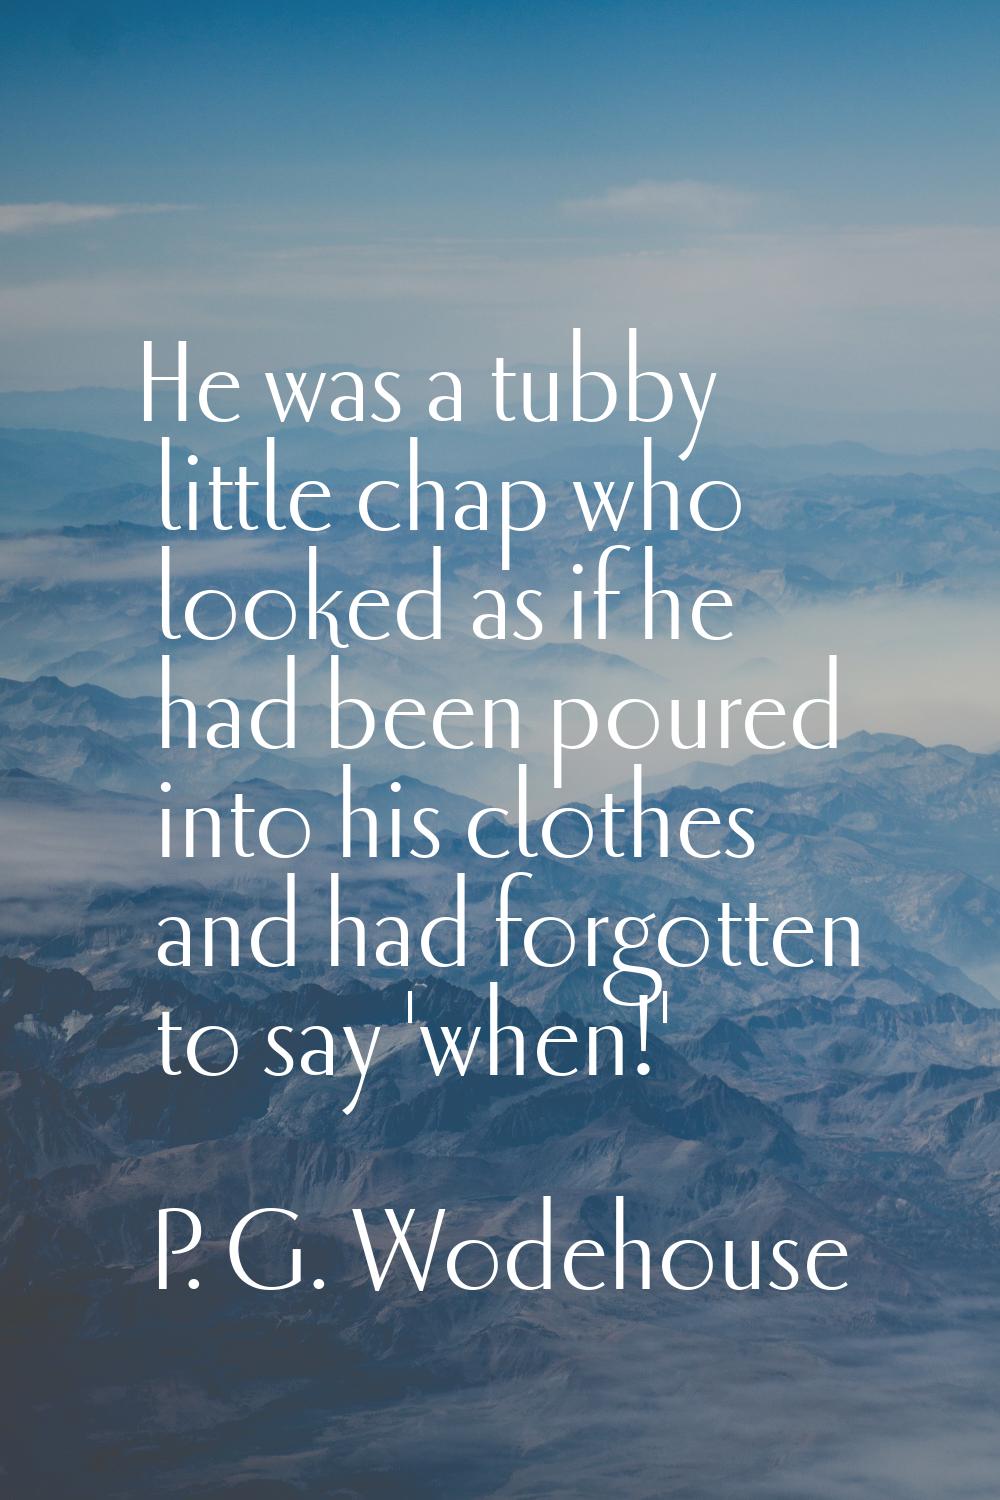 He was a tubby little chap who looked as if he had been poured into his clothes and had forgotten t